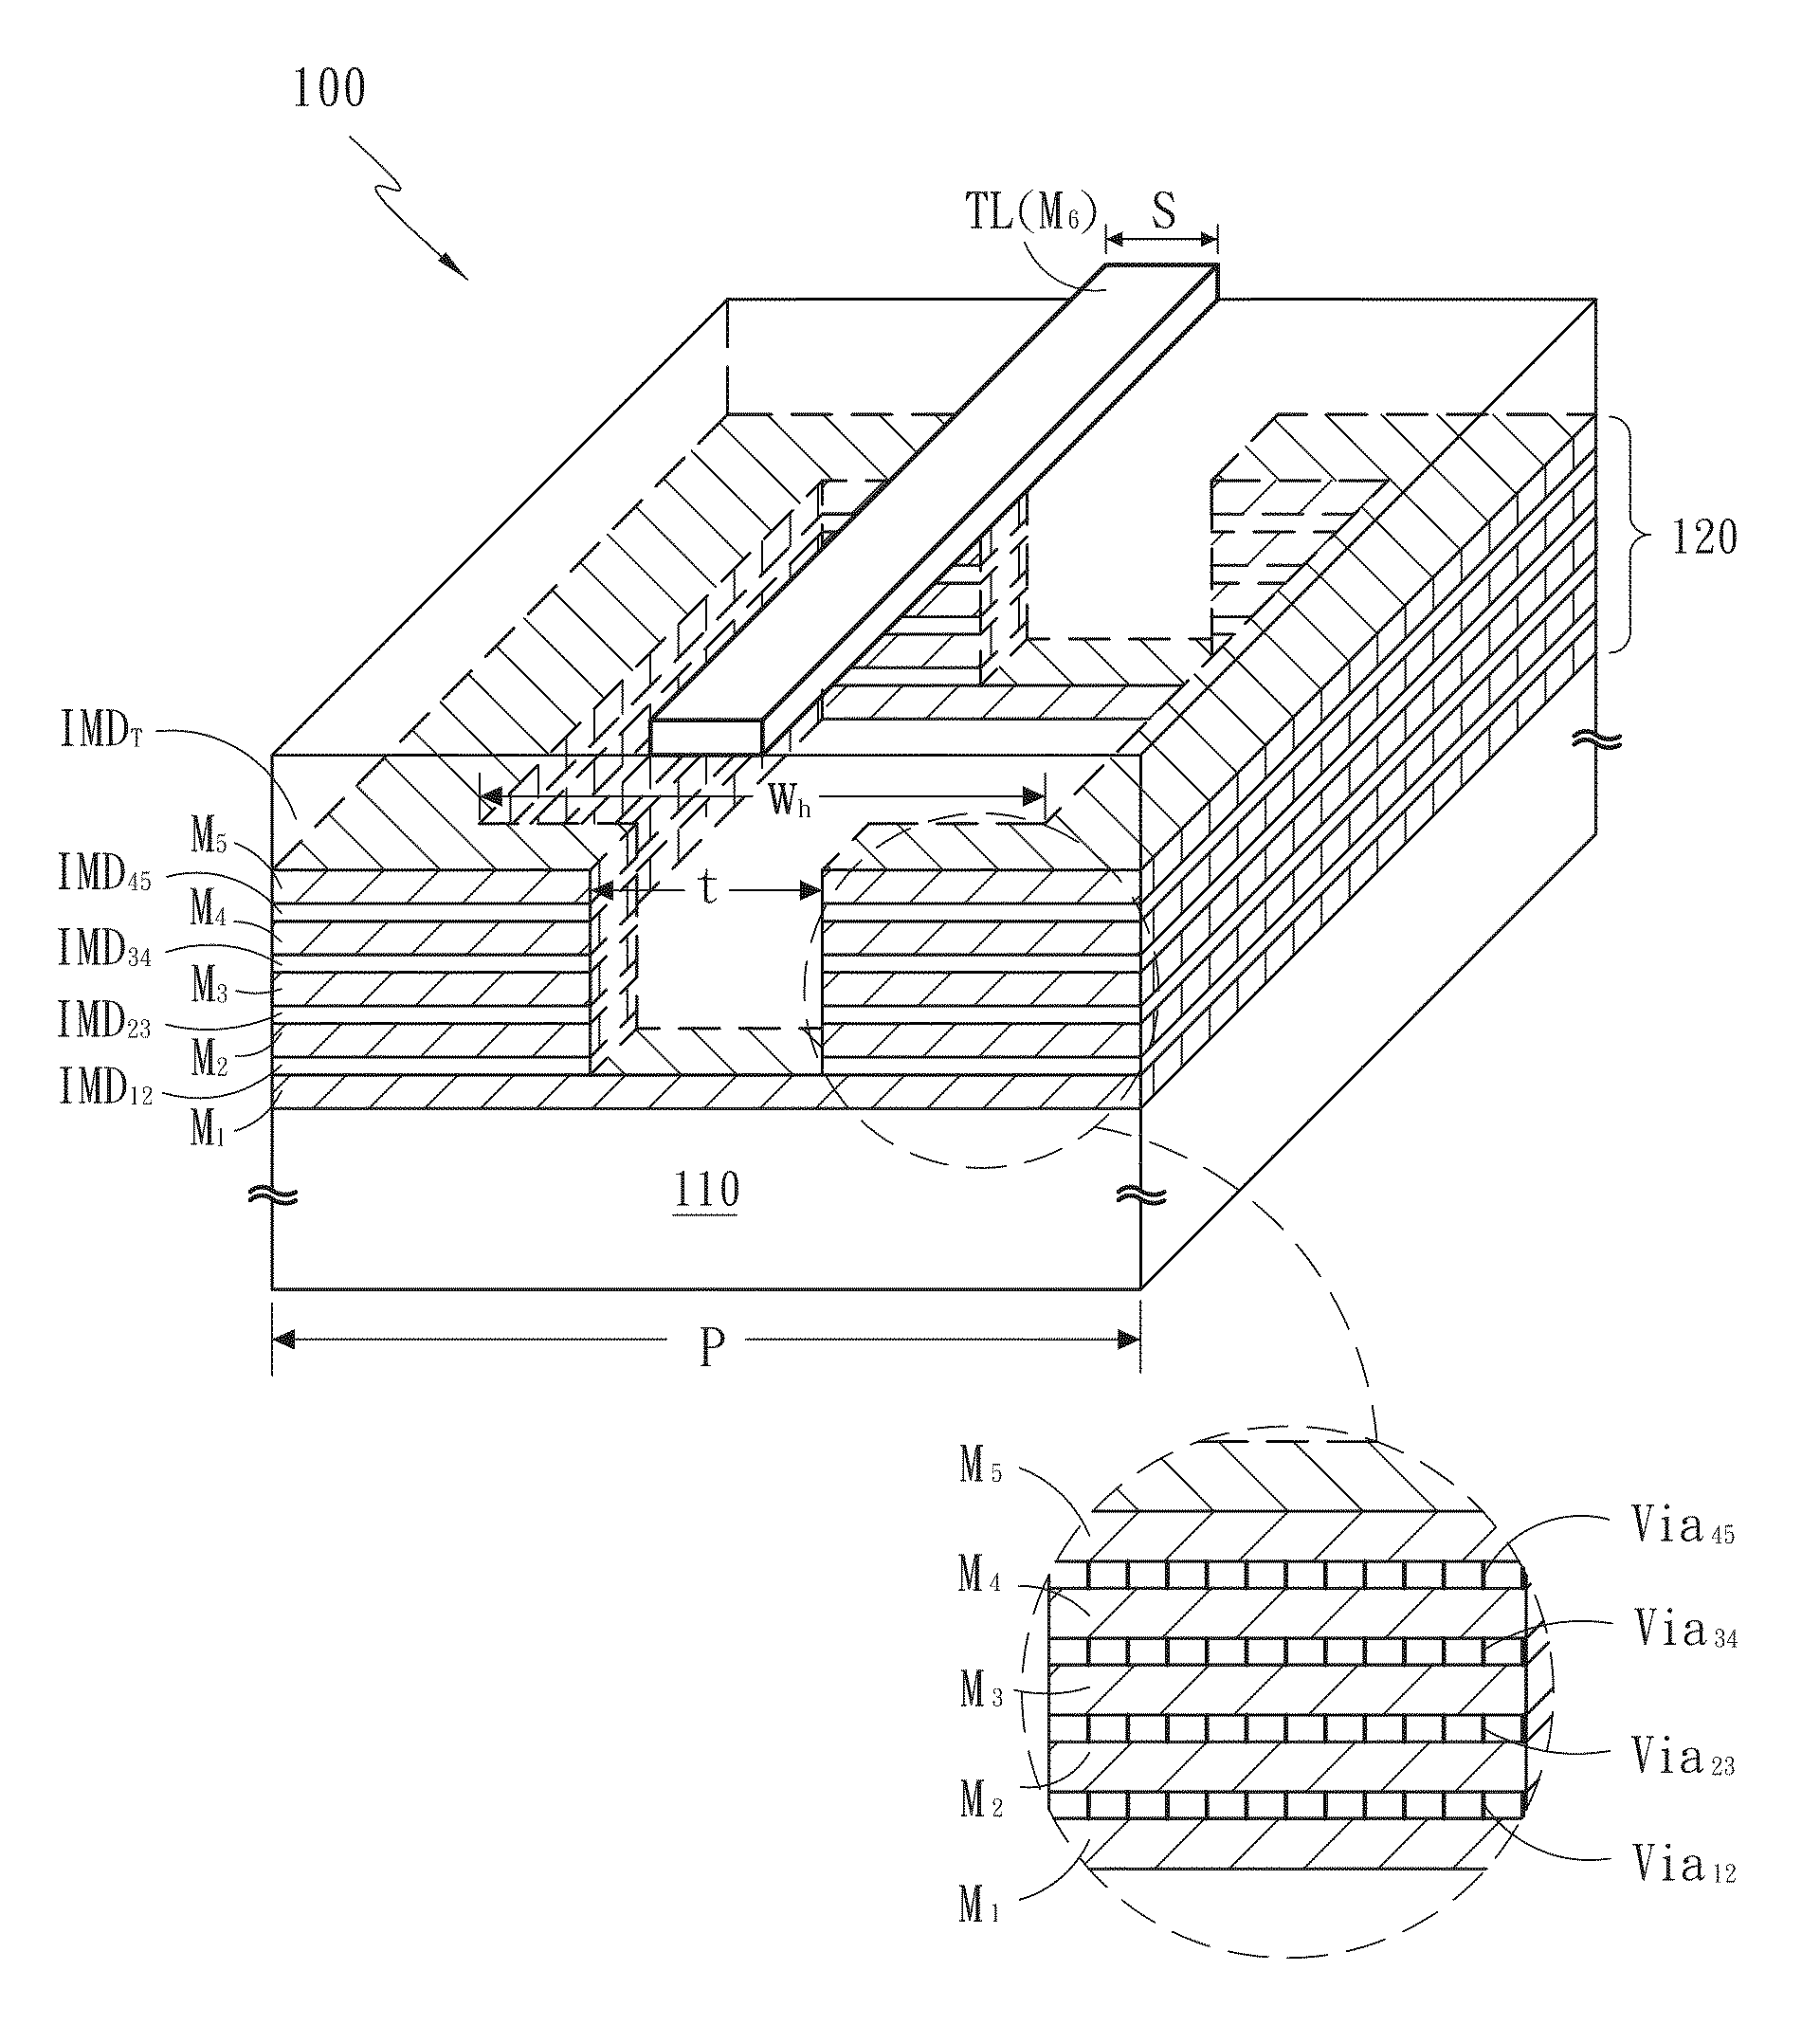 Complementary-conducting-strip transmission line structure with plural stacked mesh ground planes